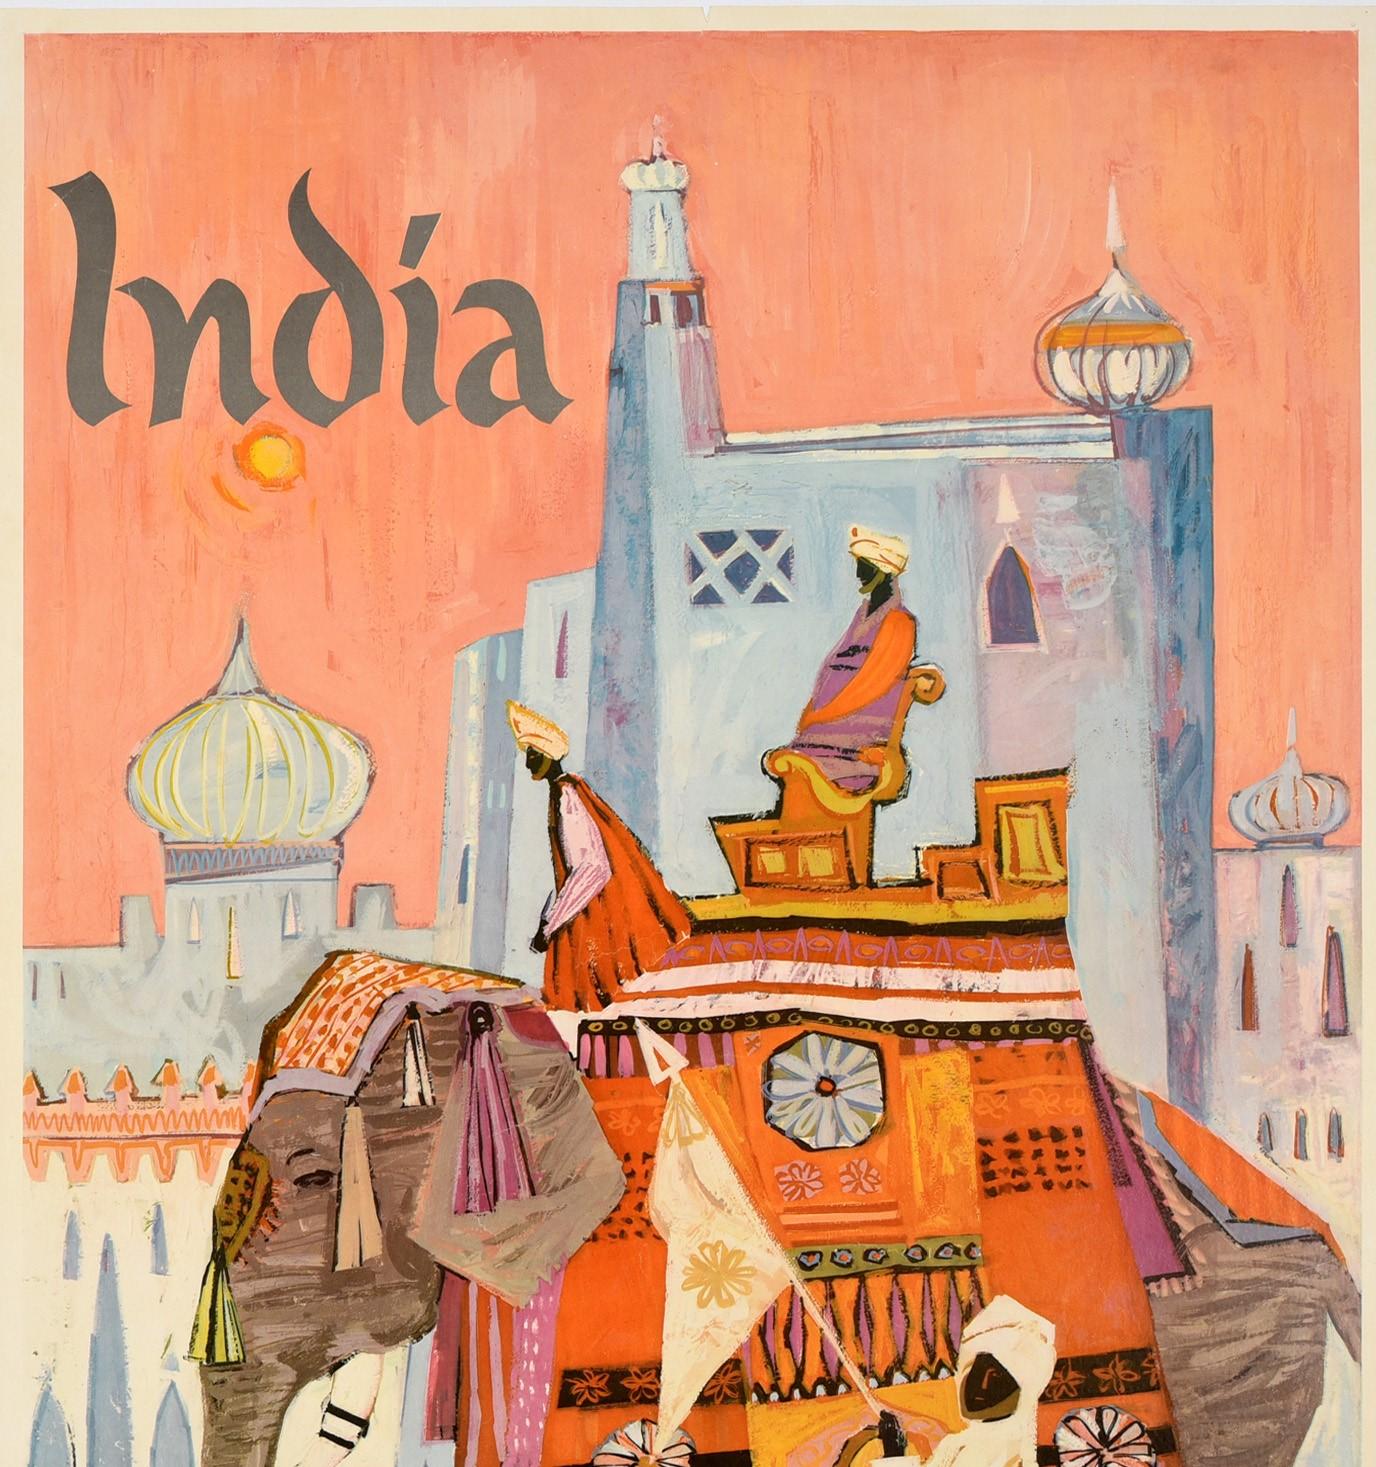 Original vintage travel poster for India featuring a colourful illustration depicting a regal elephant with a brightly coloured howdah carriage being ridden by two men in robes in front of traditional Indian architecture with a man walking in the